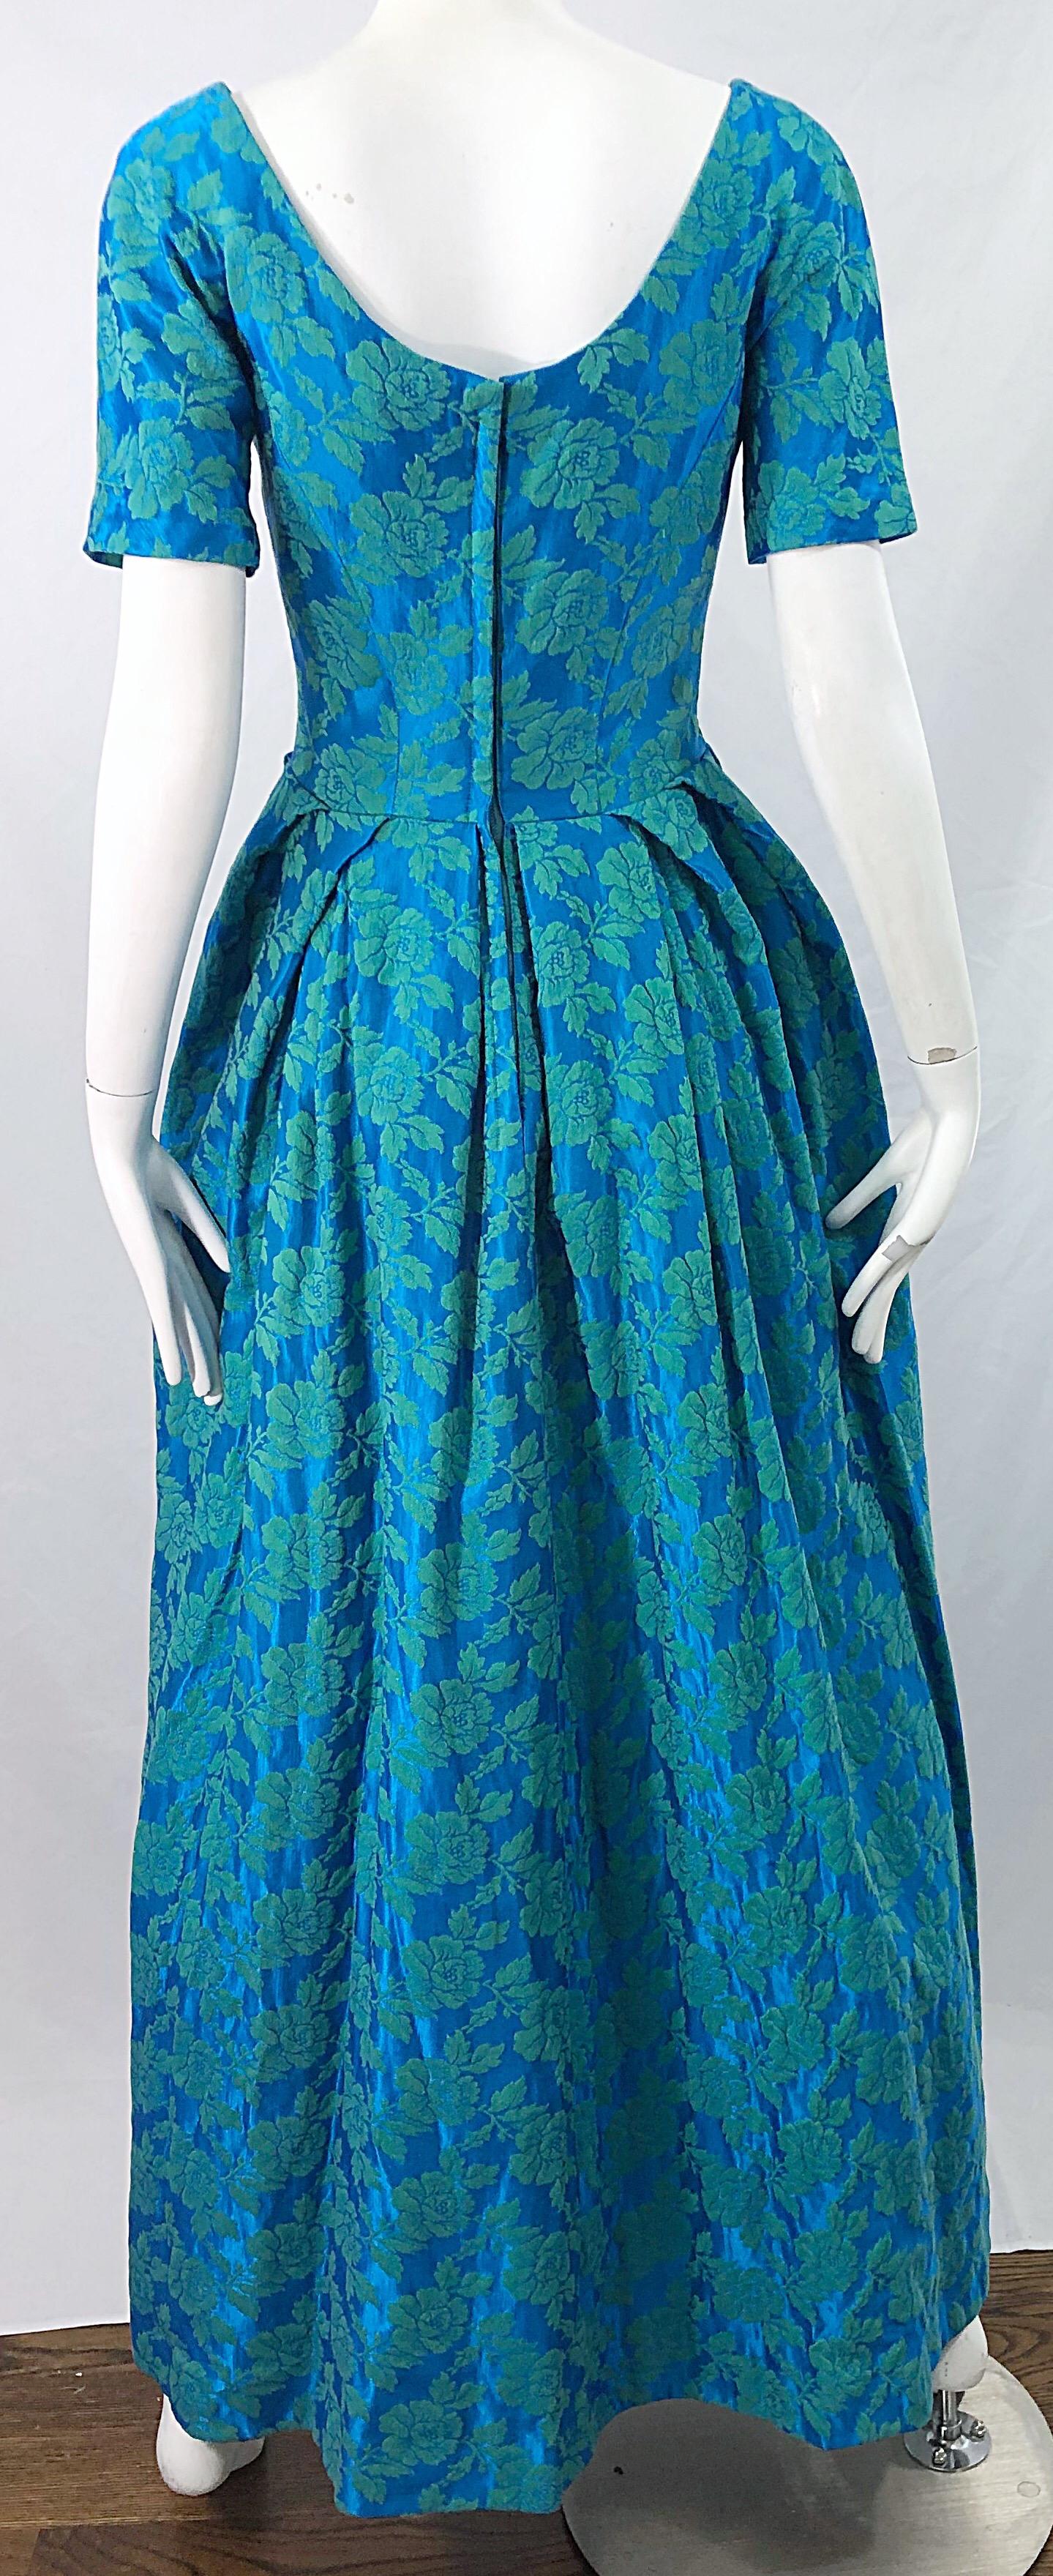 Women's 1960s House of Bianchi Demi Couture Turquoise Blue Silk Brocade Vintage 60s Gown For Sale